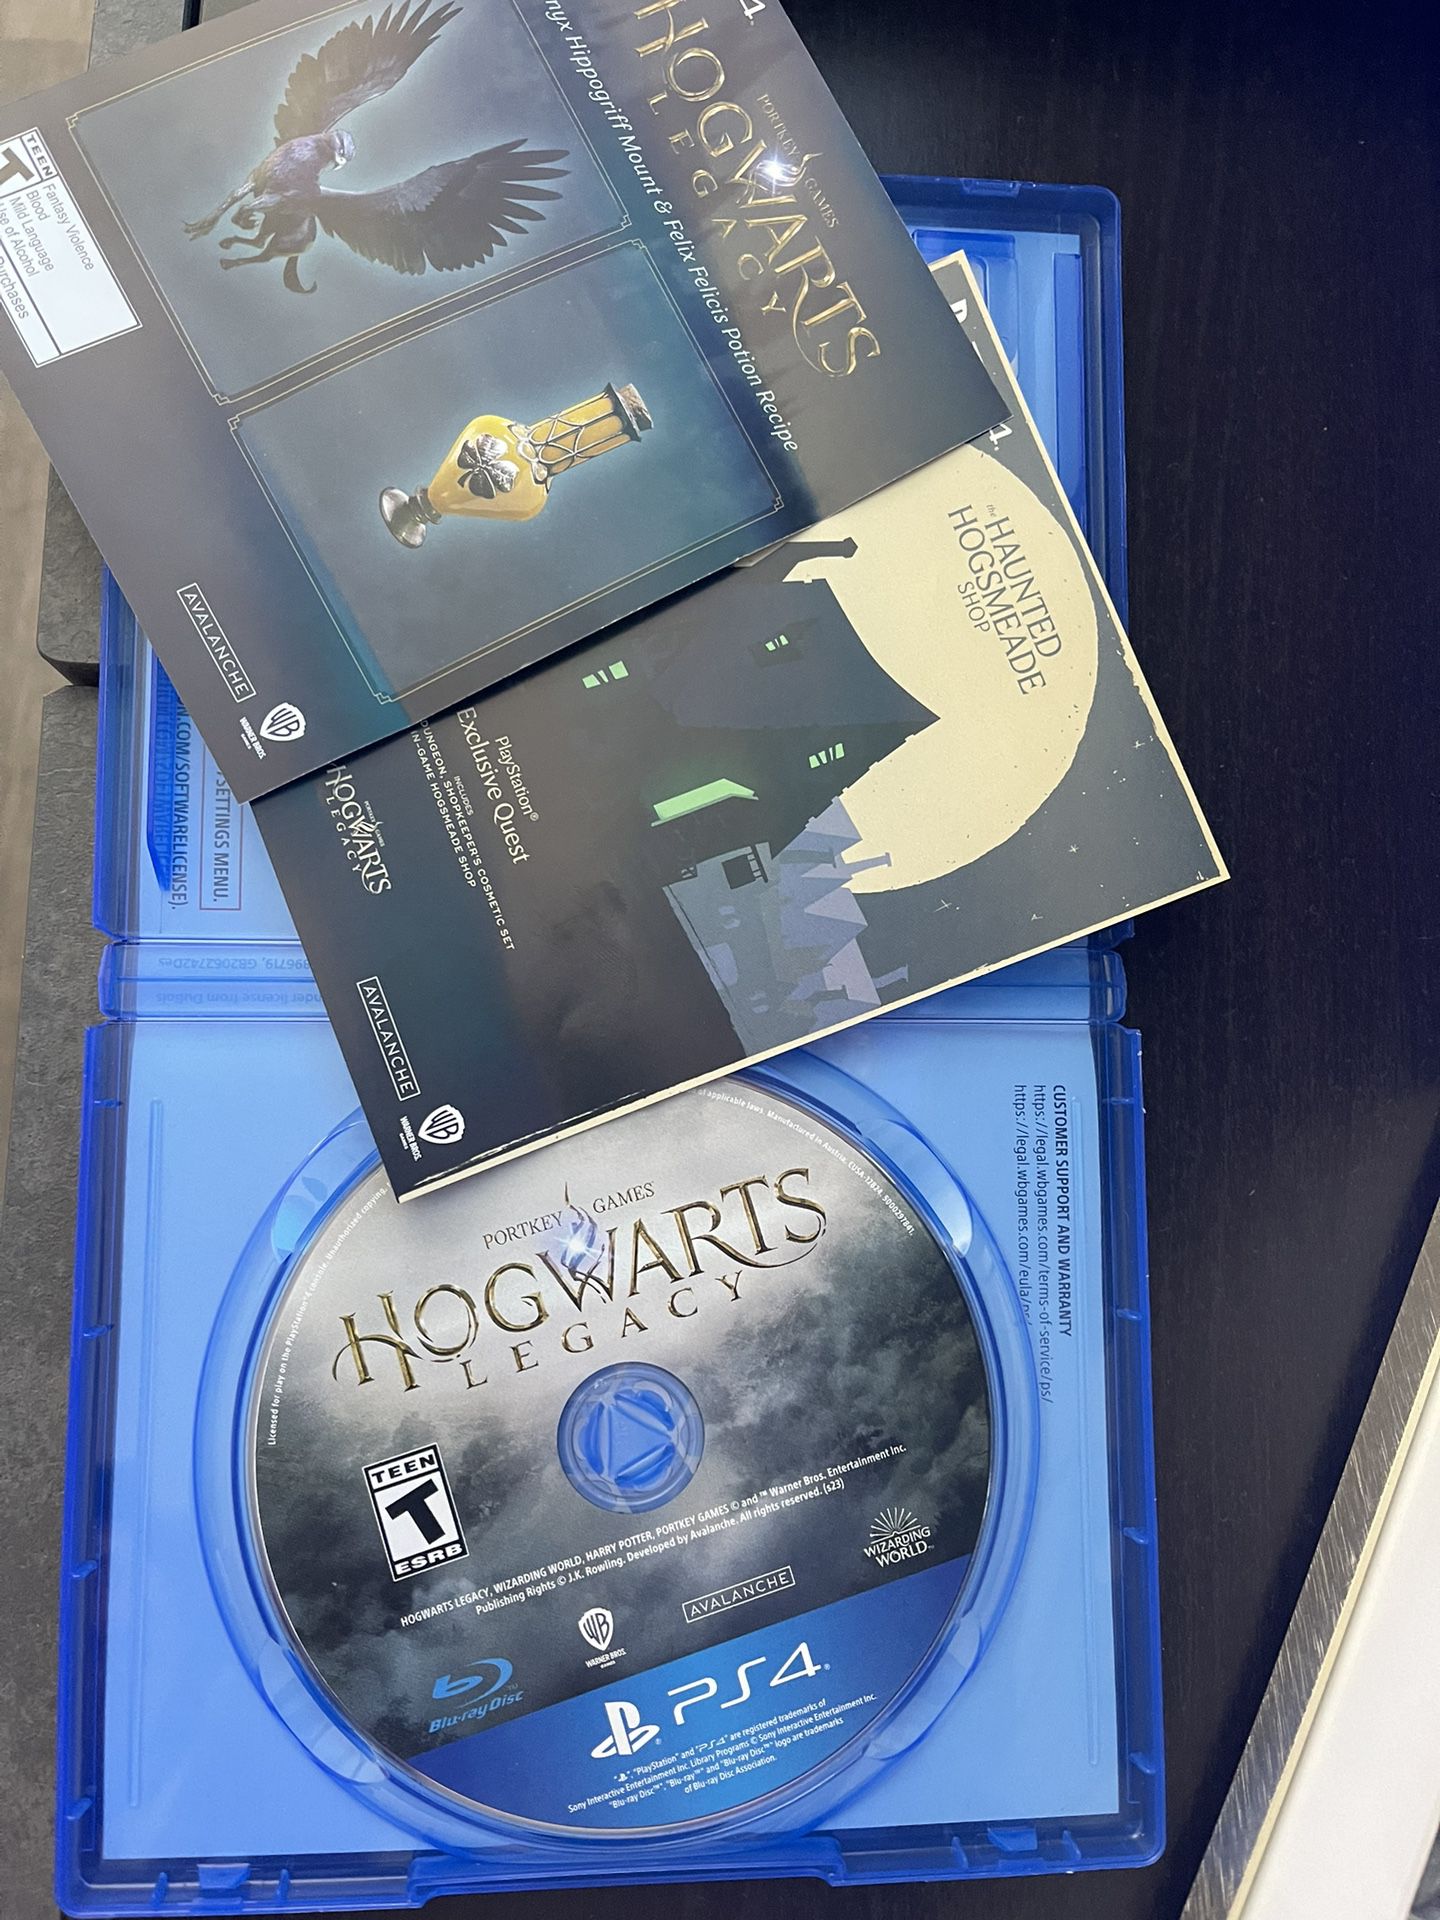 Hogwarts Legacy PS4 Deluxe Edition for Sale in Laud By Sea, FL - OfferUp